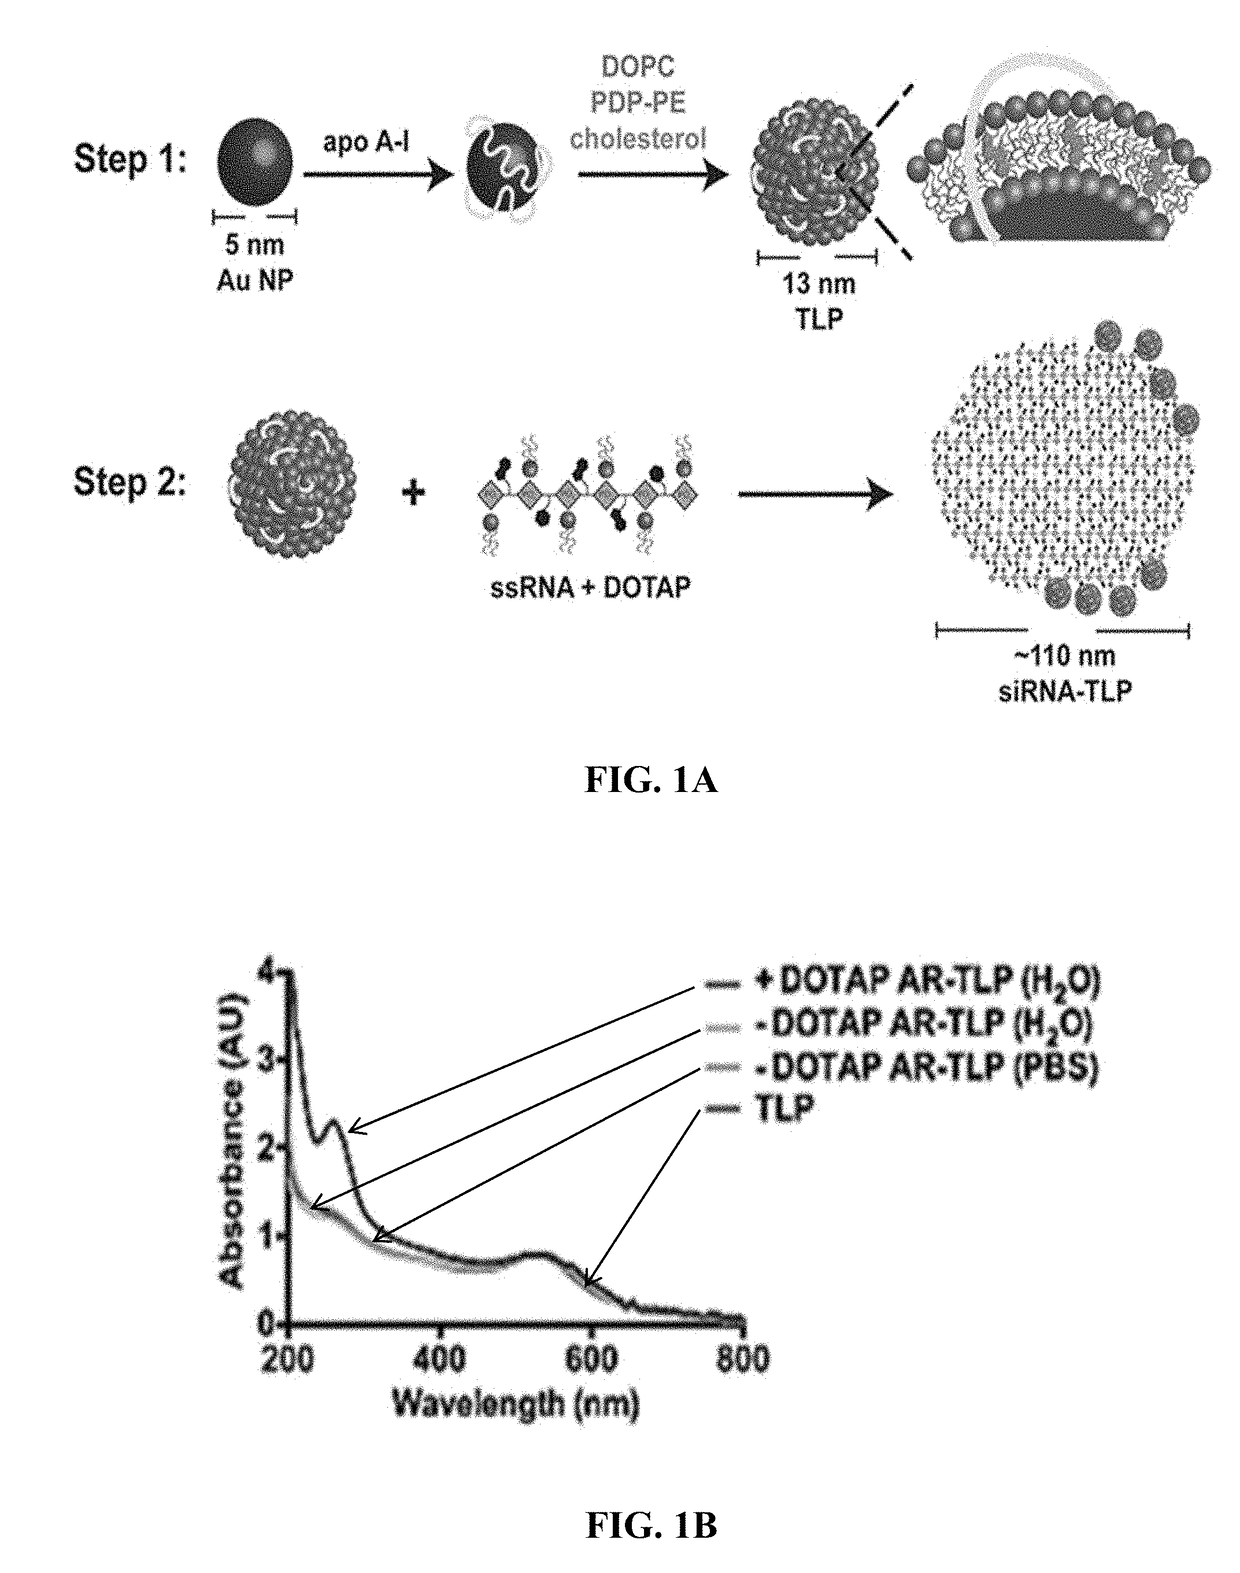 Short interfering RNA templated lipoprotein particles (sirna-tlp)